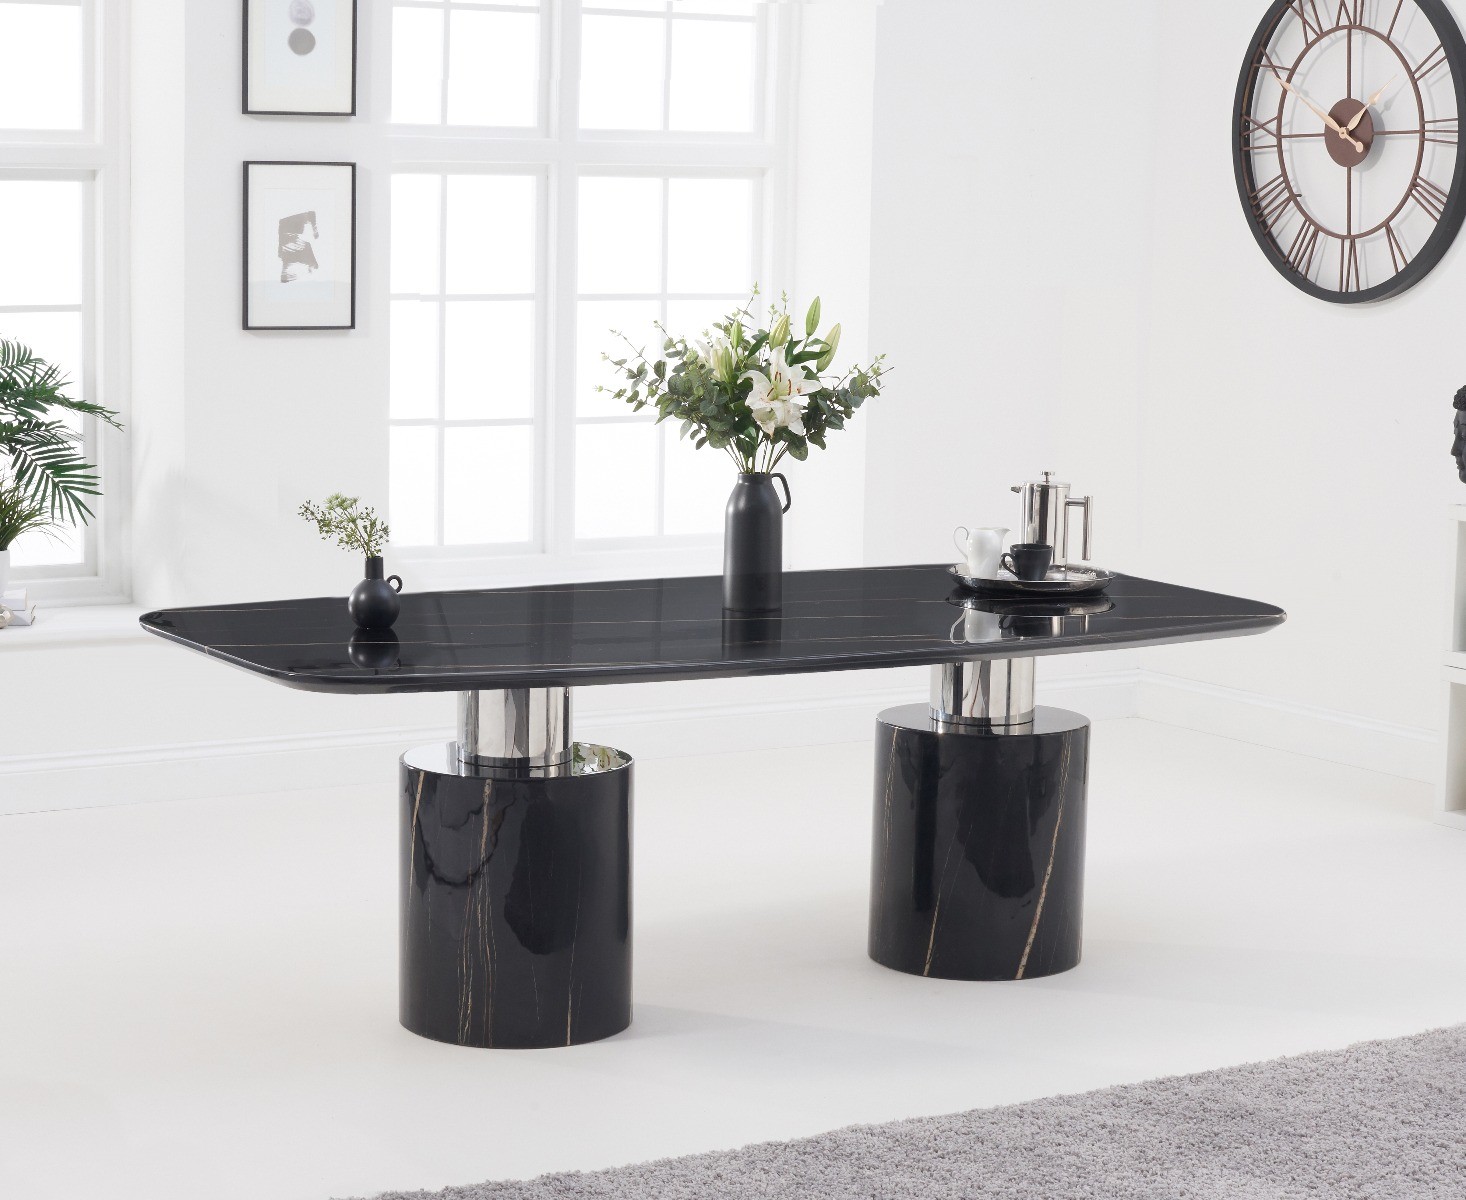 Photo 1 of Antonio 220cm black marble dining table with 6 grey francesca chairs